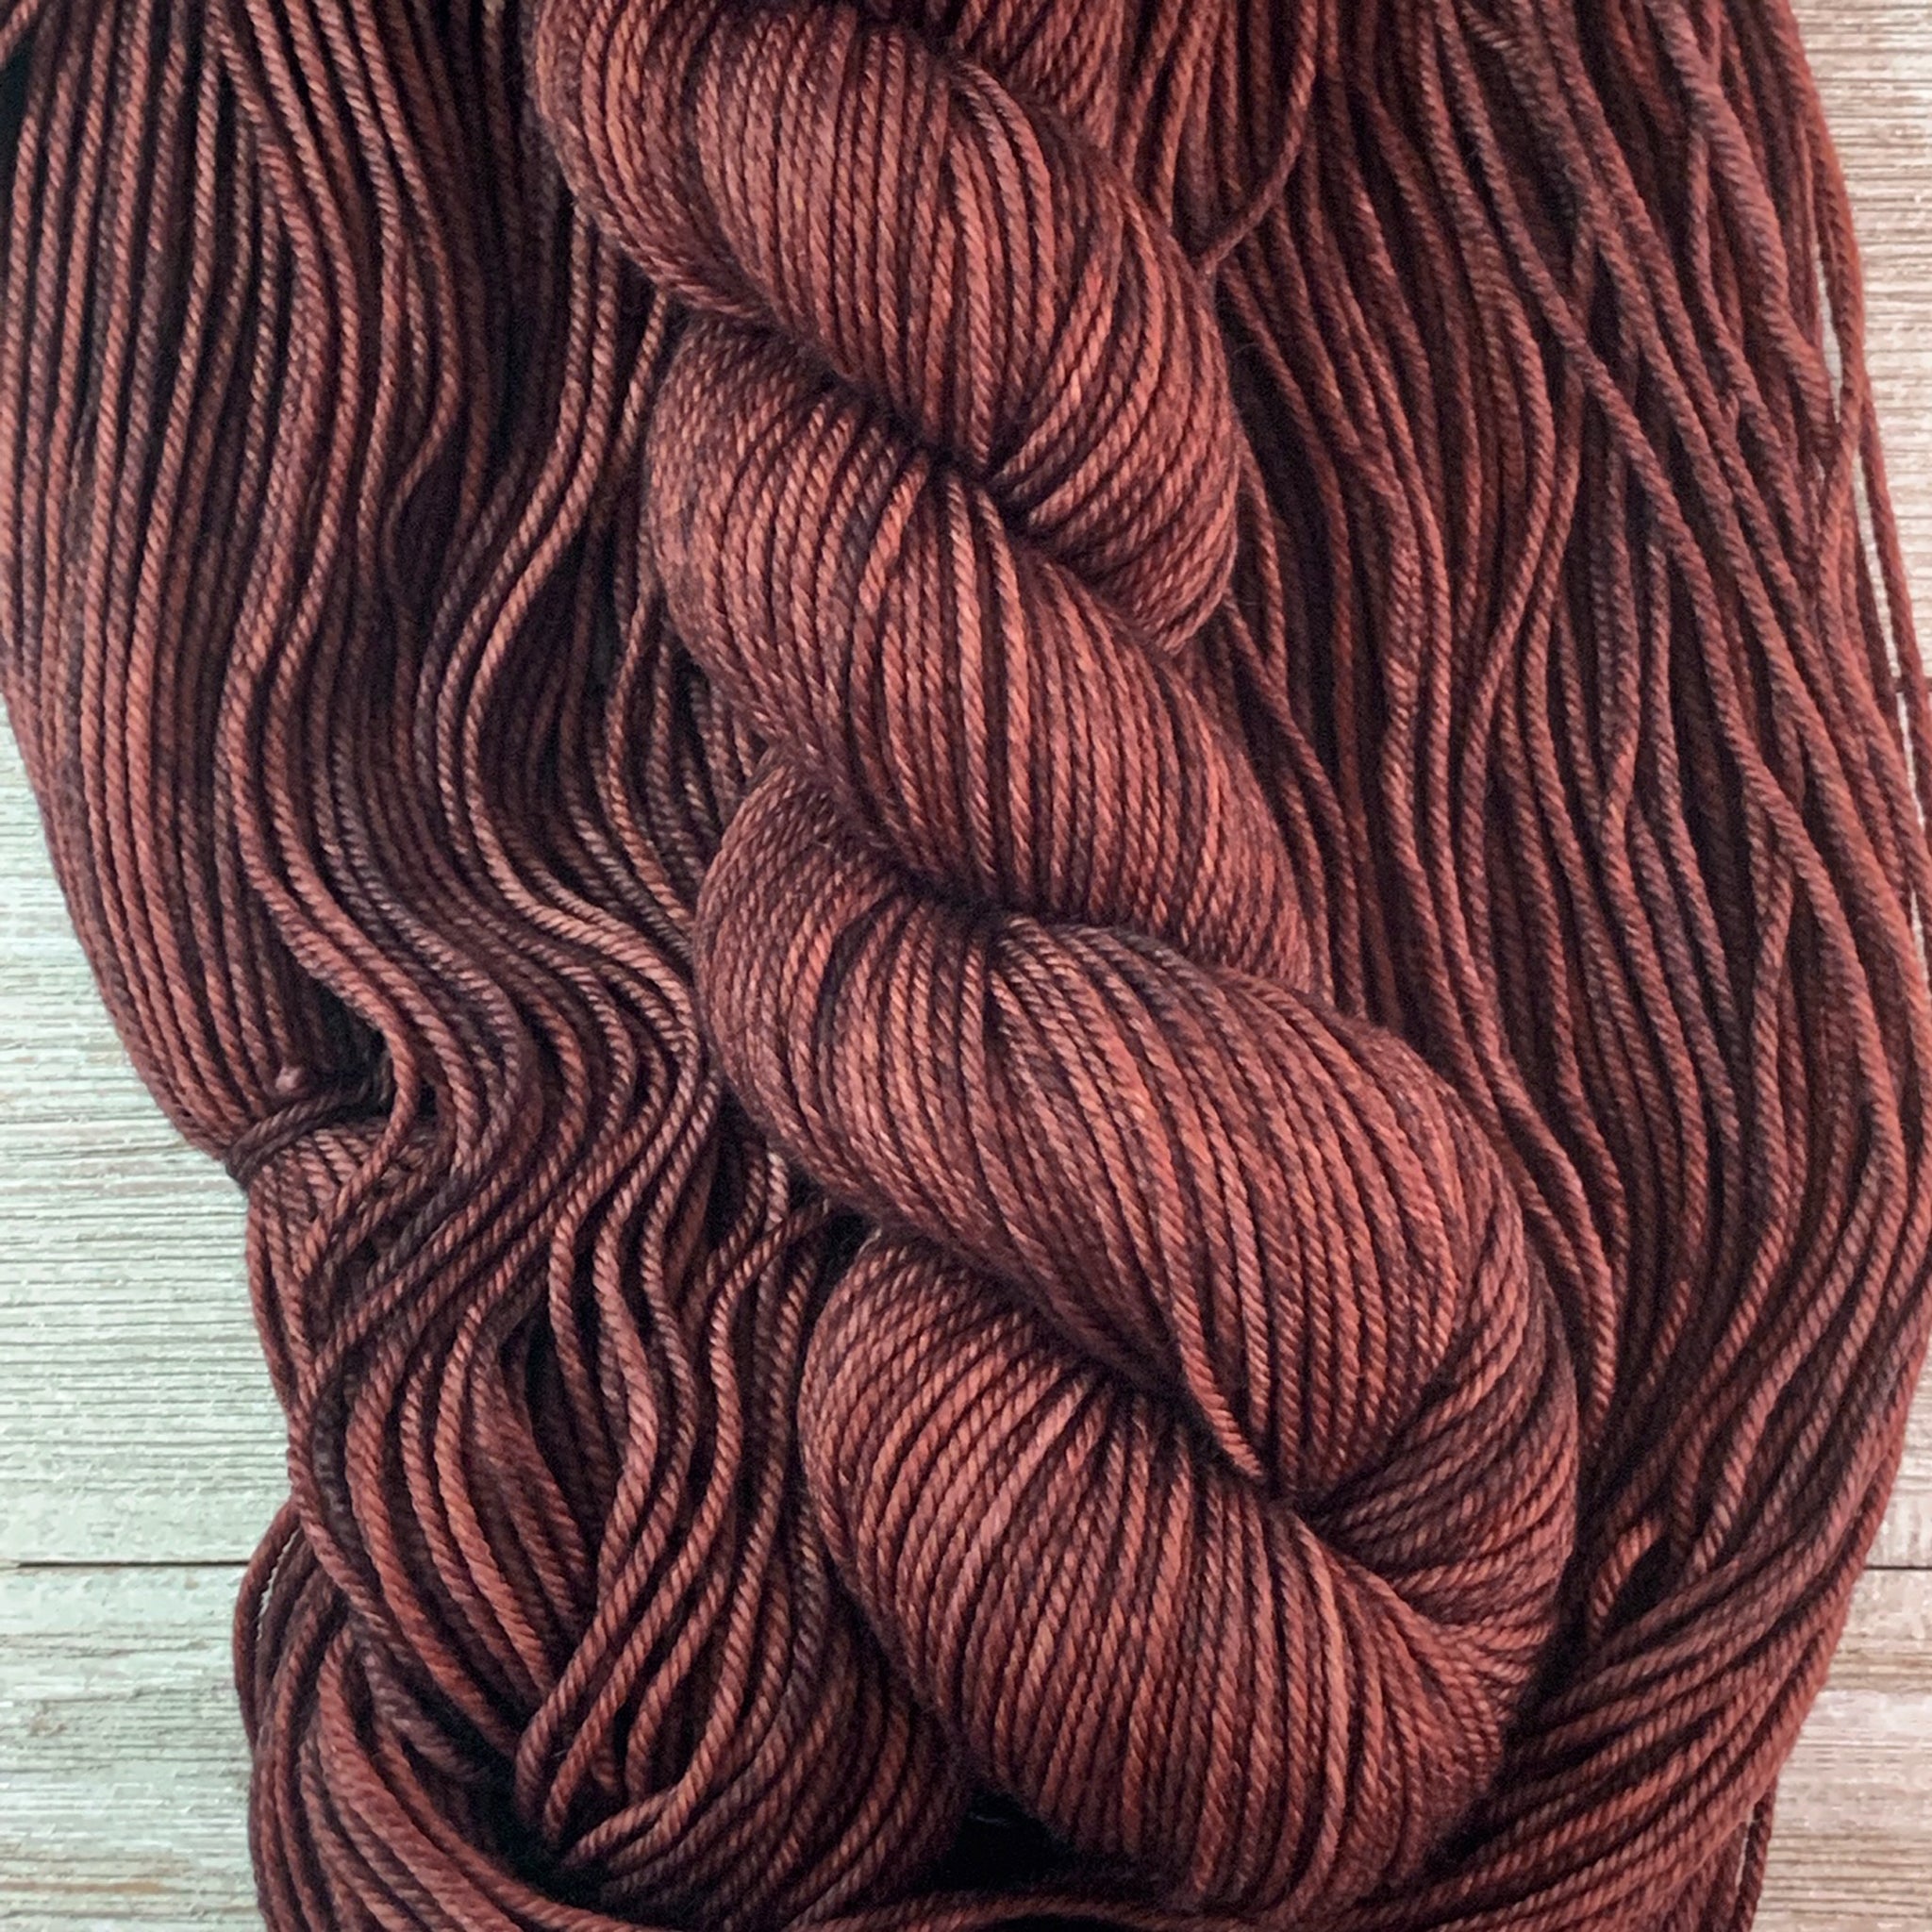 ww kashmir Truffle, hand-dyed worsted weight merino and cashmere yarn